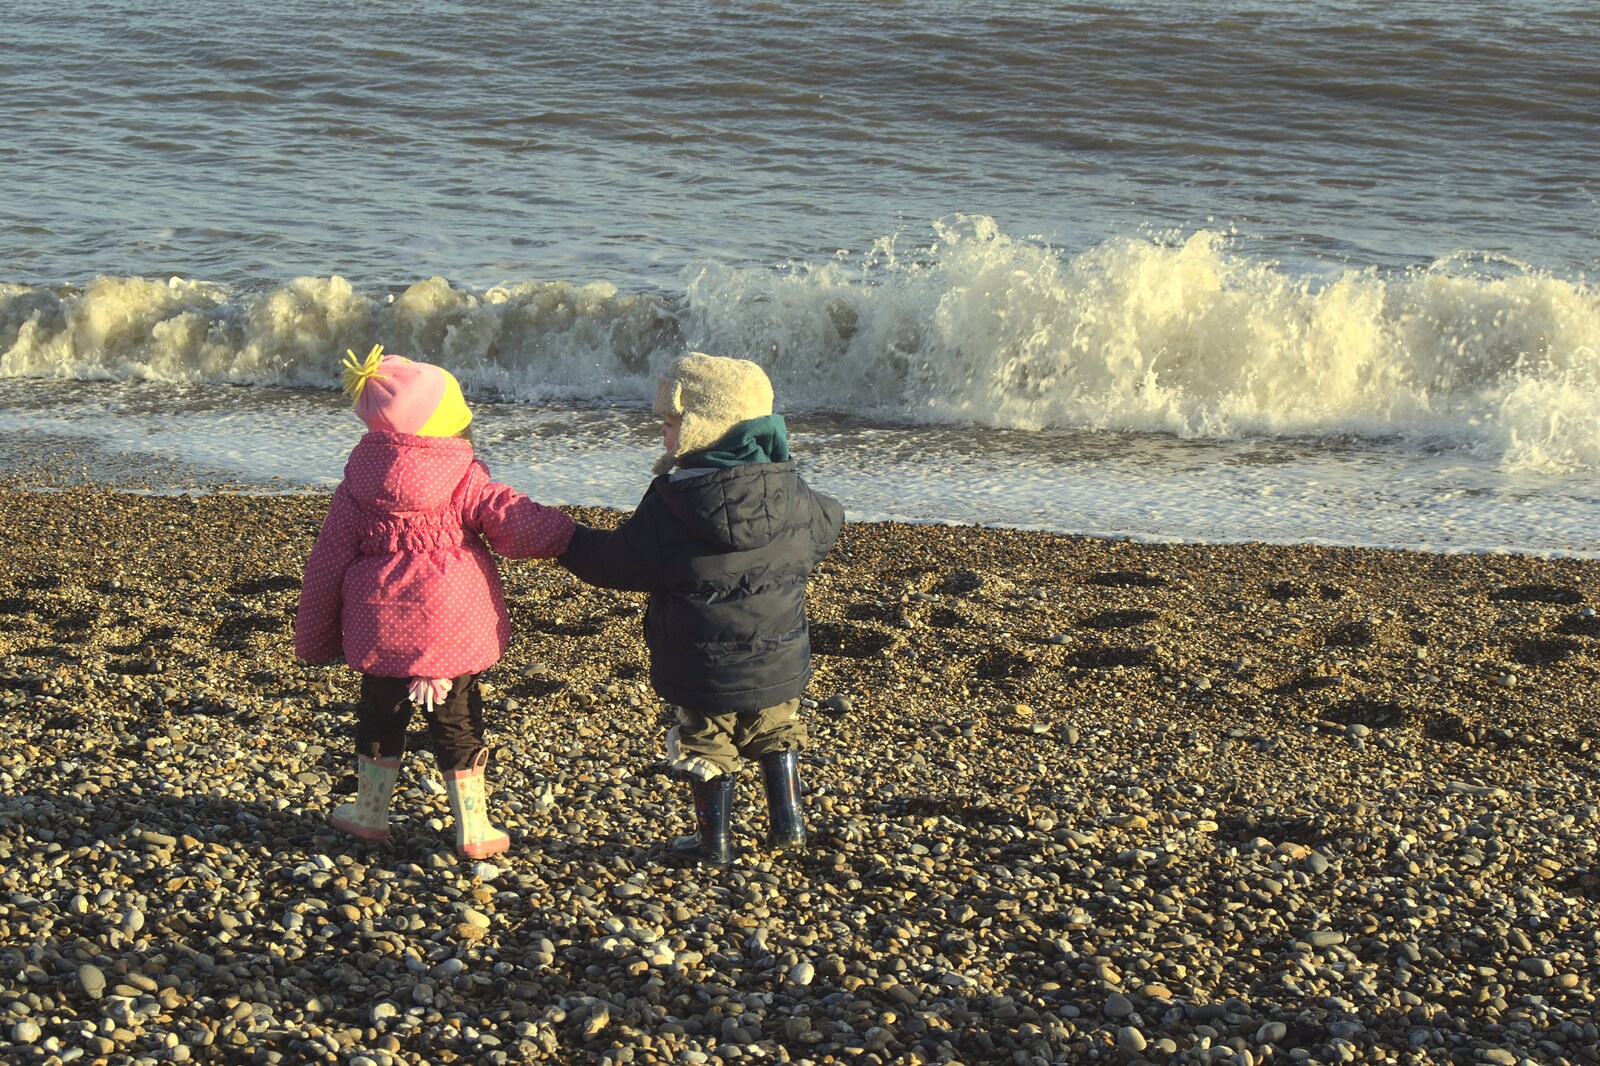 A Trip to Thorpeness, Suffolk - 9th January 2011: Amelia and Fred hold hands on the beach